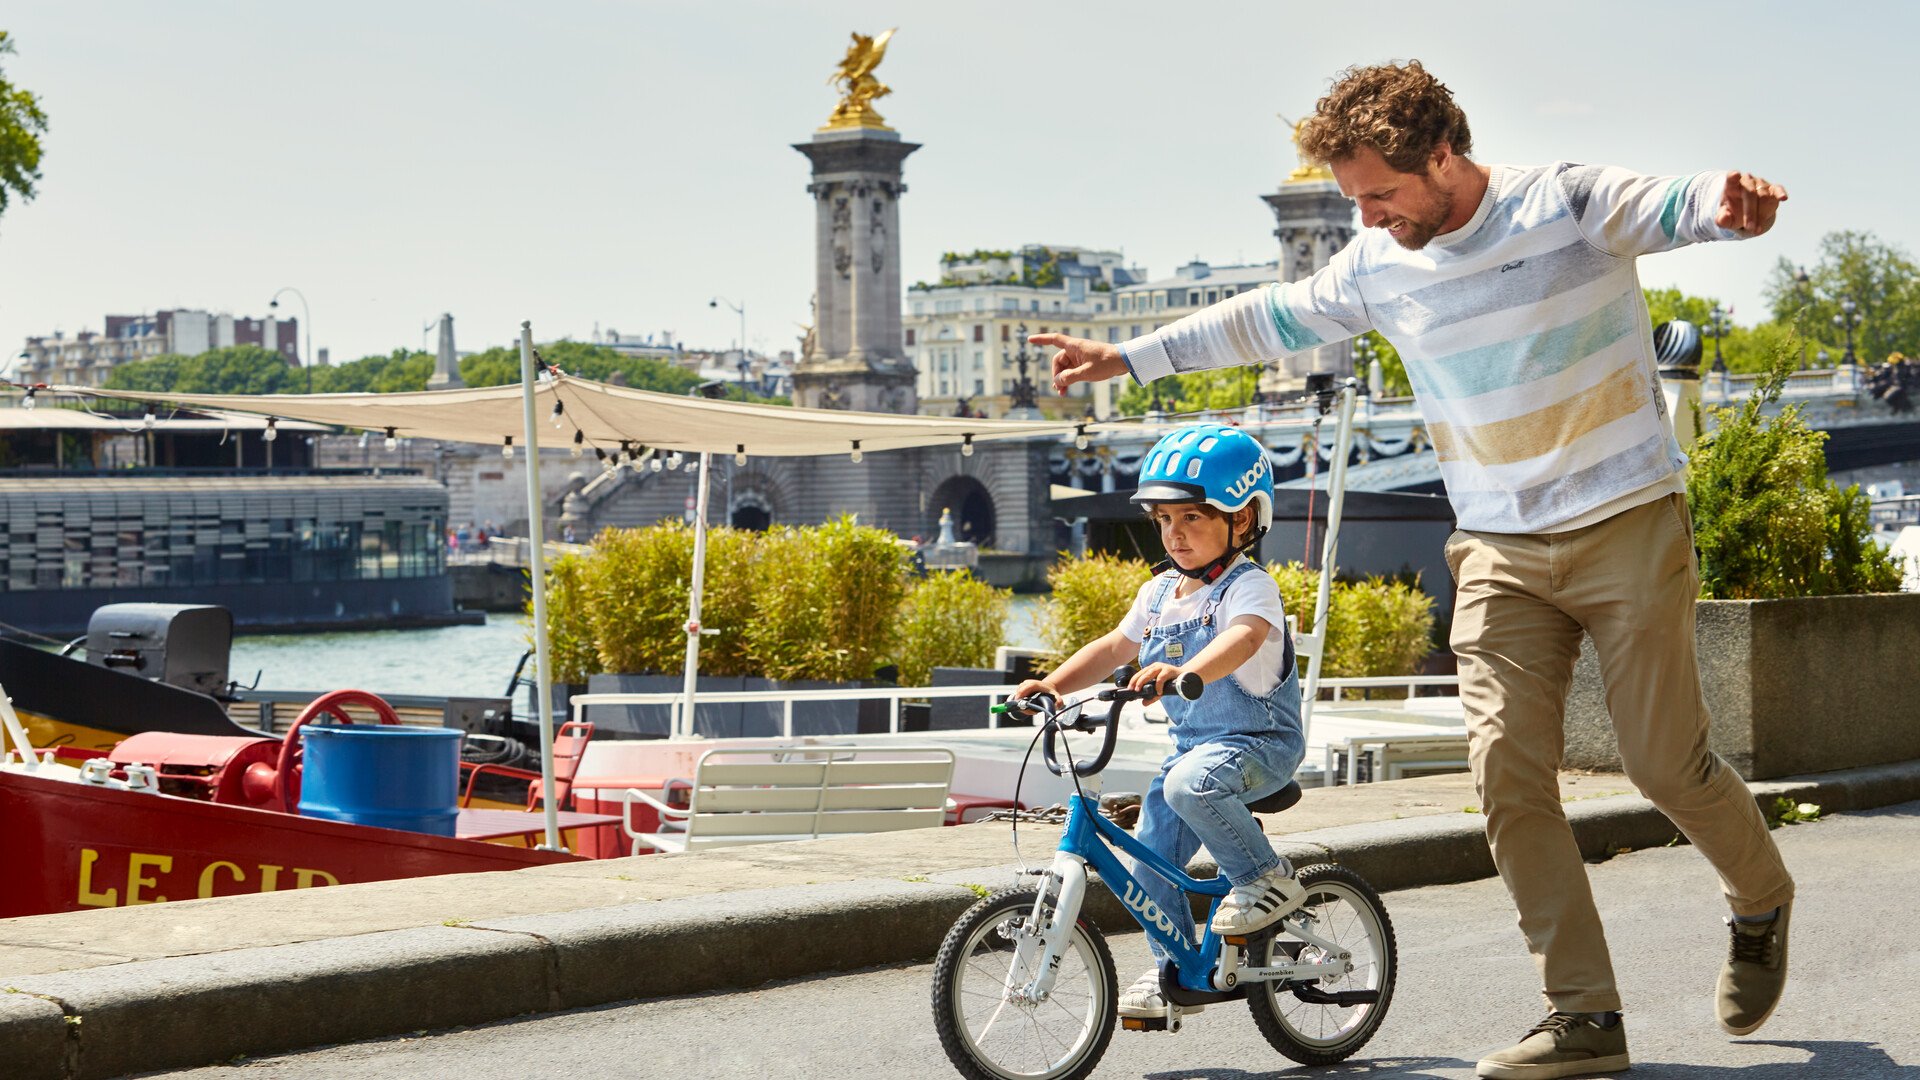 A child in a blue helmet is concentrating intensely on riding their blue bike with an adult jogging alongside.